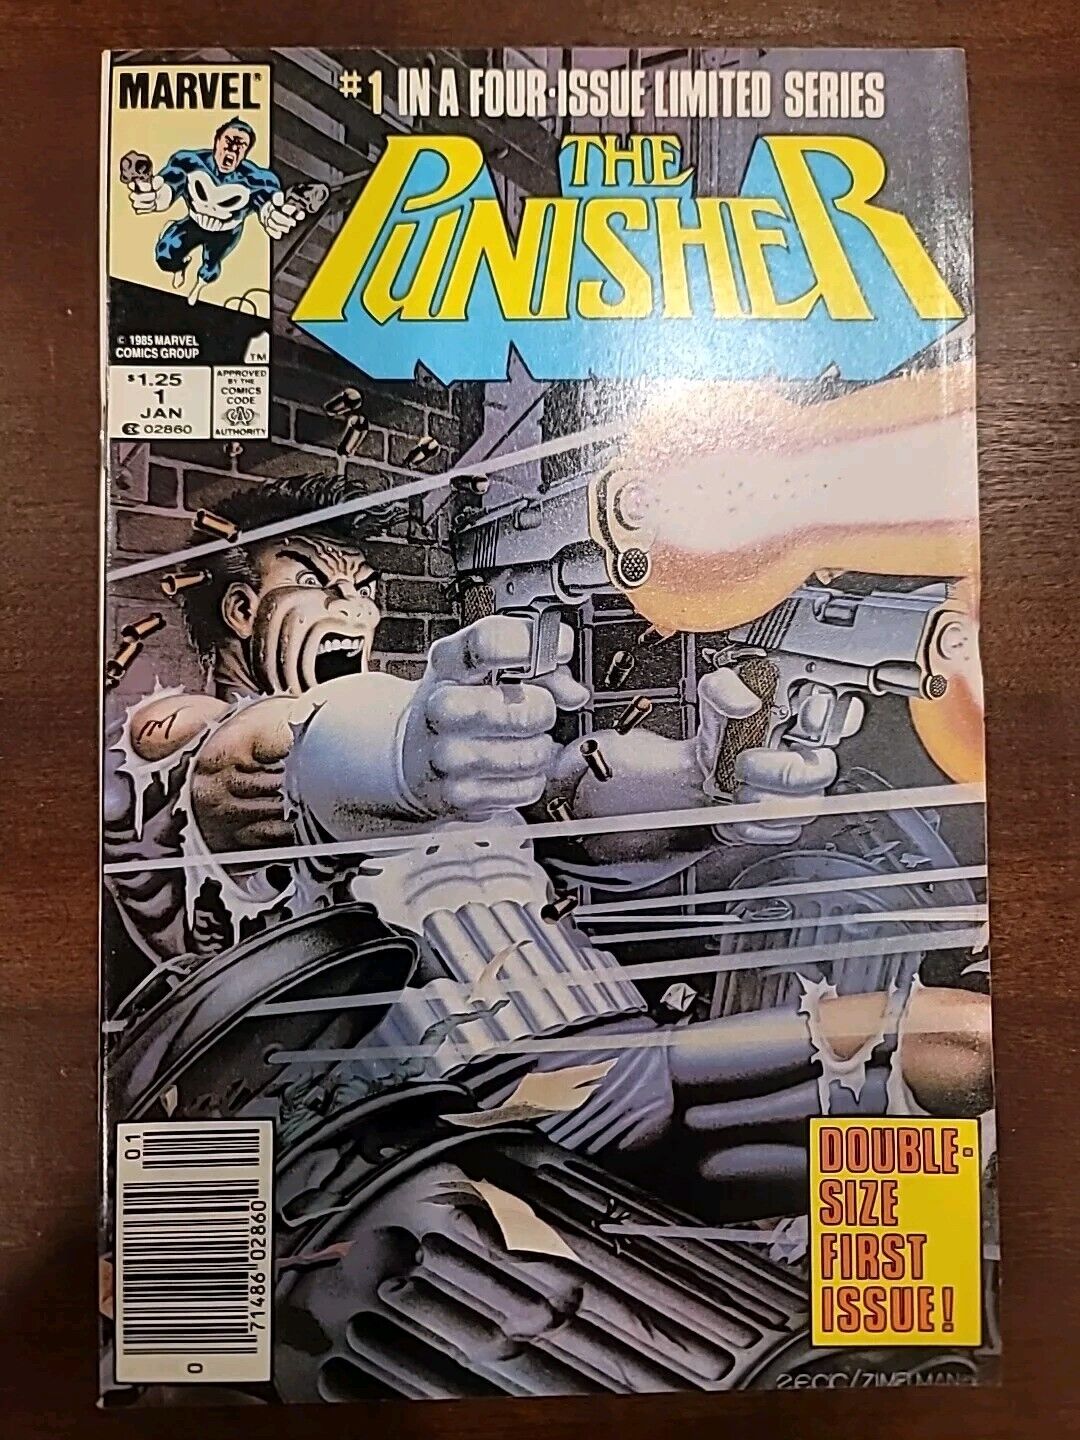 The Punisher #1 Limited Series (1985) - 1, 2, 3 - 1st Solo Series Newsstand